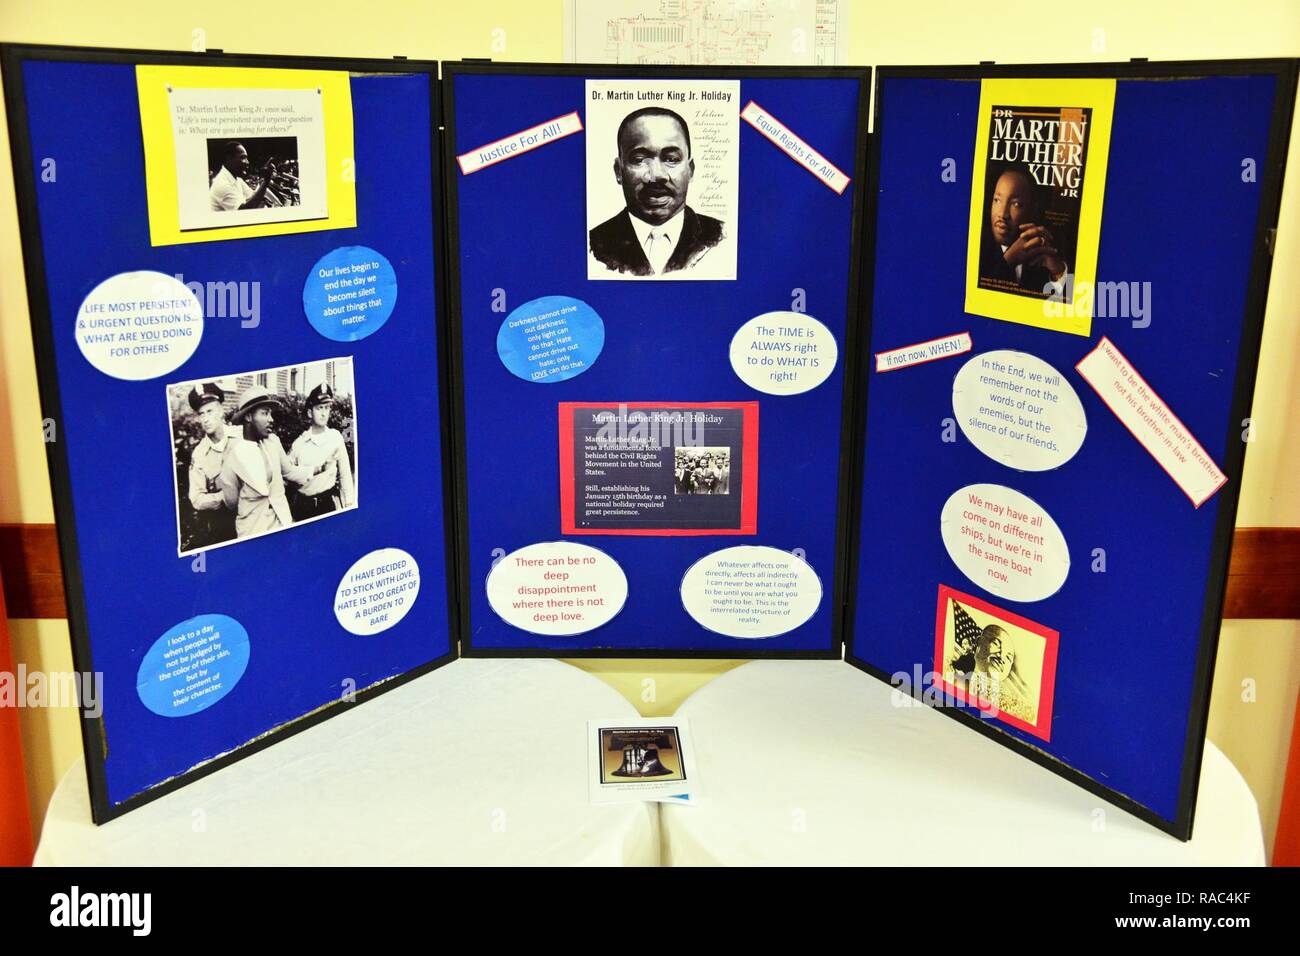 Martin Luther King, Jr. Day display at Vicenza Military Community’s 2017 Observance Ceremony at Caserma Ederle, Vicenza, Italy, Jan. 10, 2017. Stock Photo